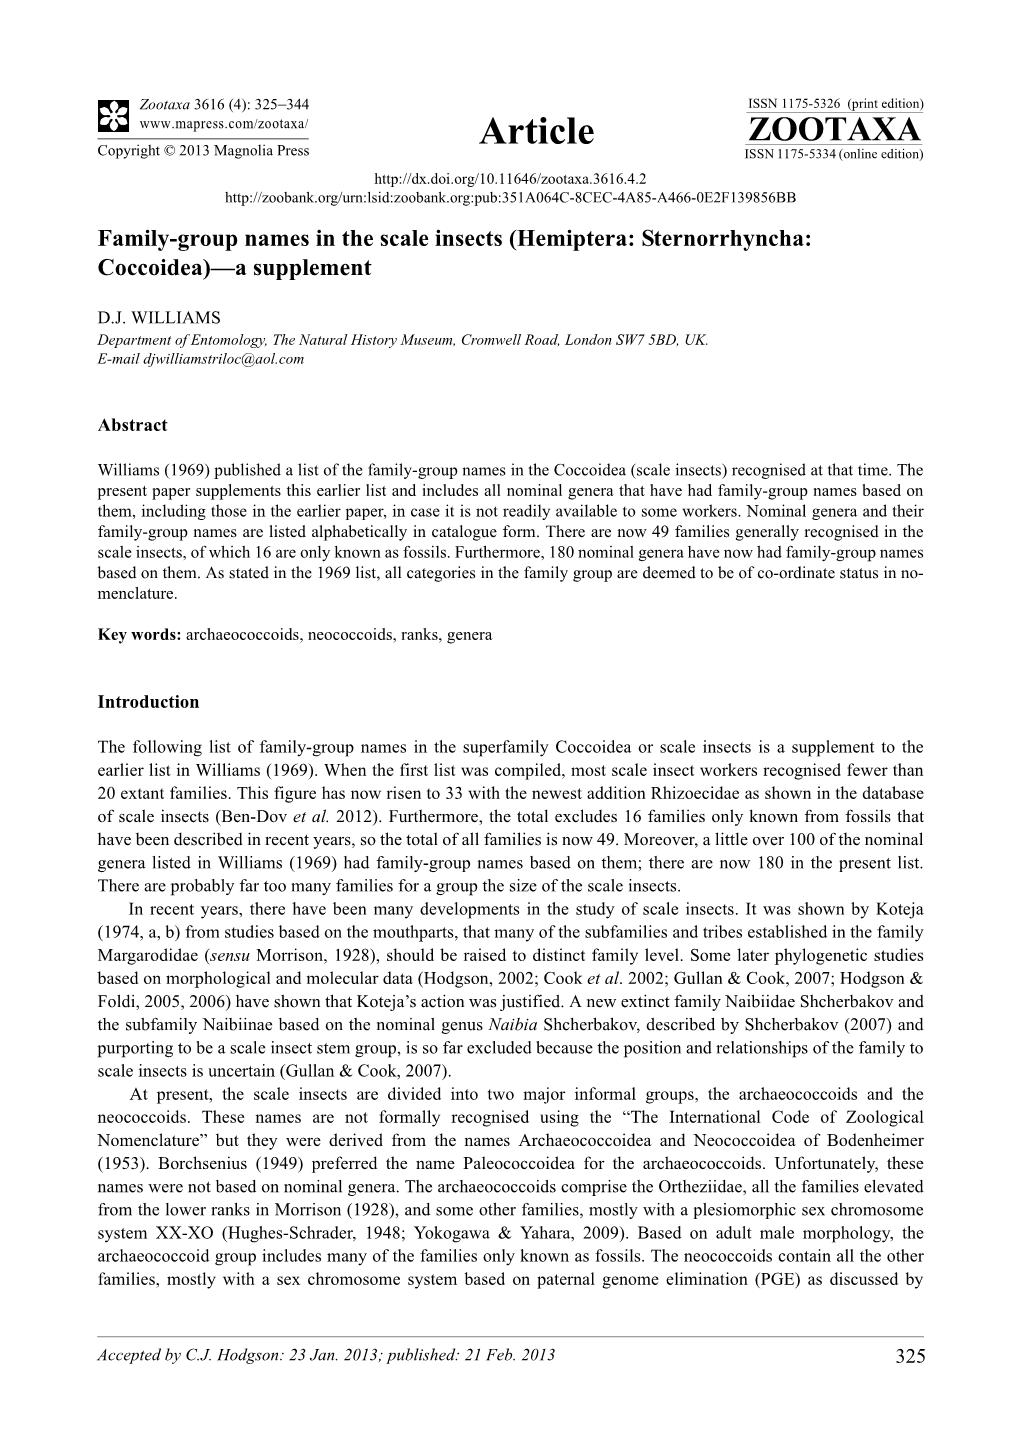 Family-Group Names in the Scale Insects (Hemiptera: Sternorrhyncha: Coccoidea)—A Supplement